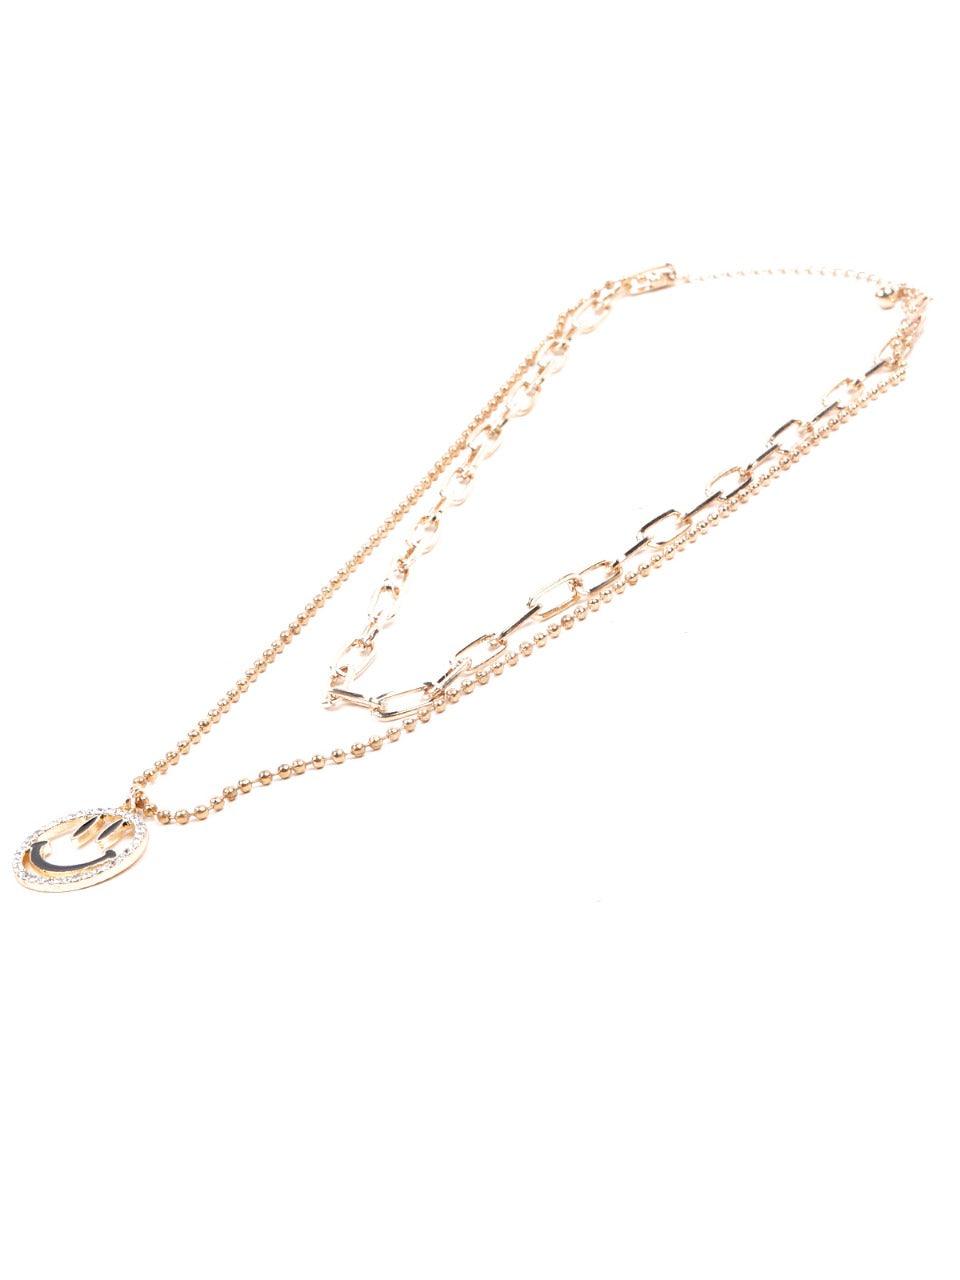 Cute smiley layered chain necklace - Gold - Odette